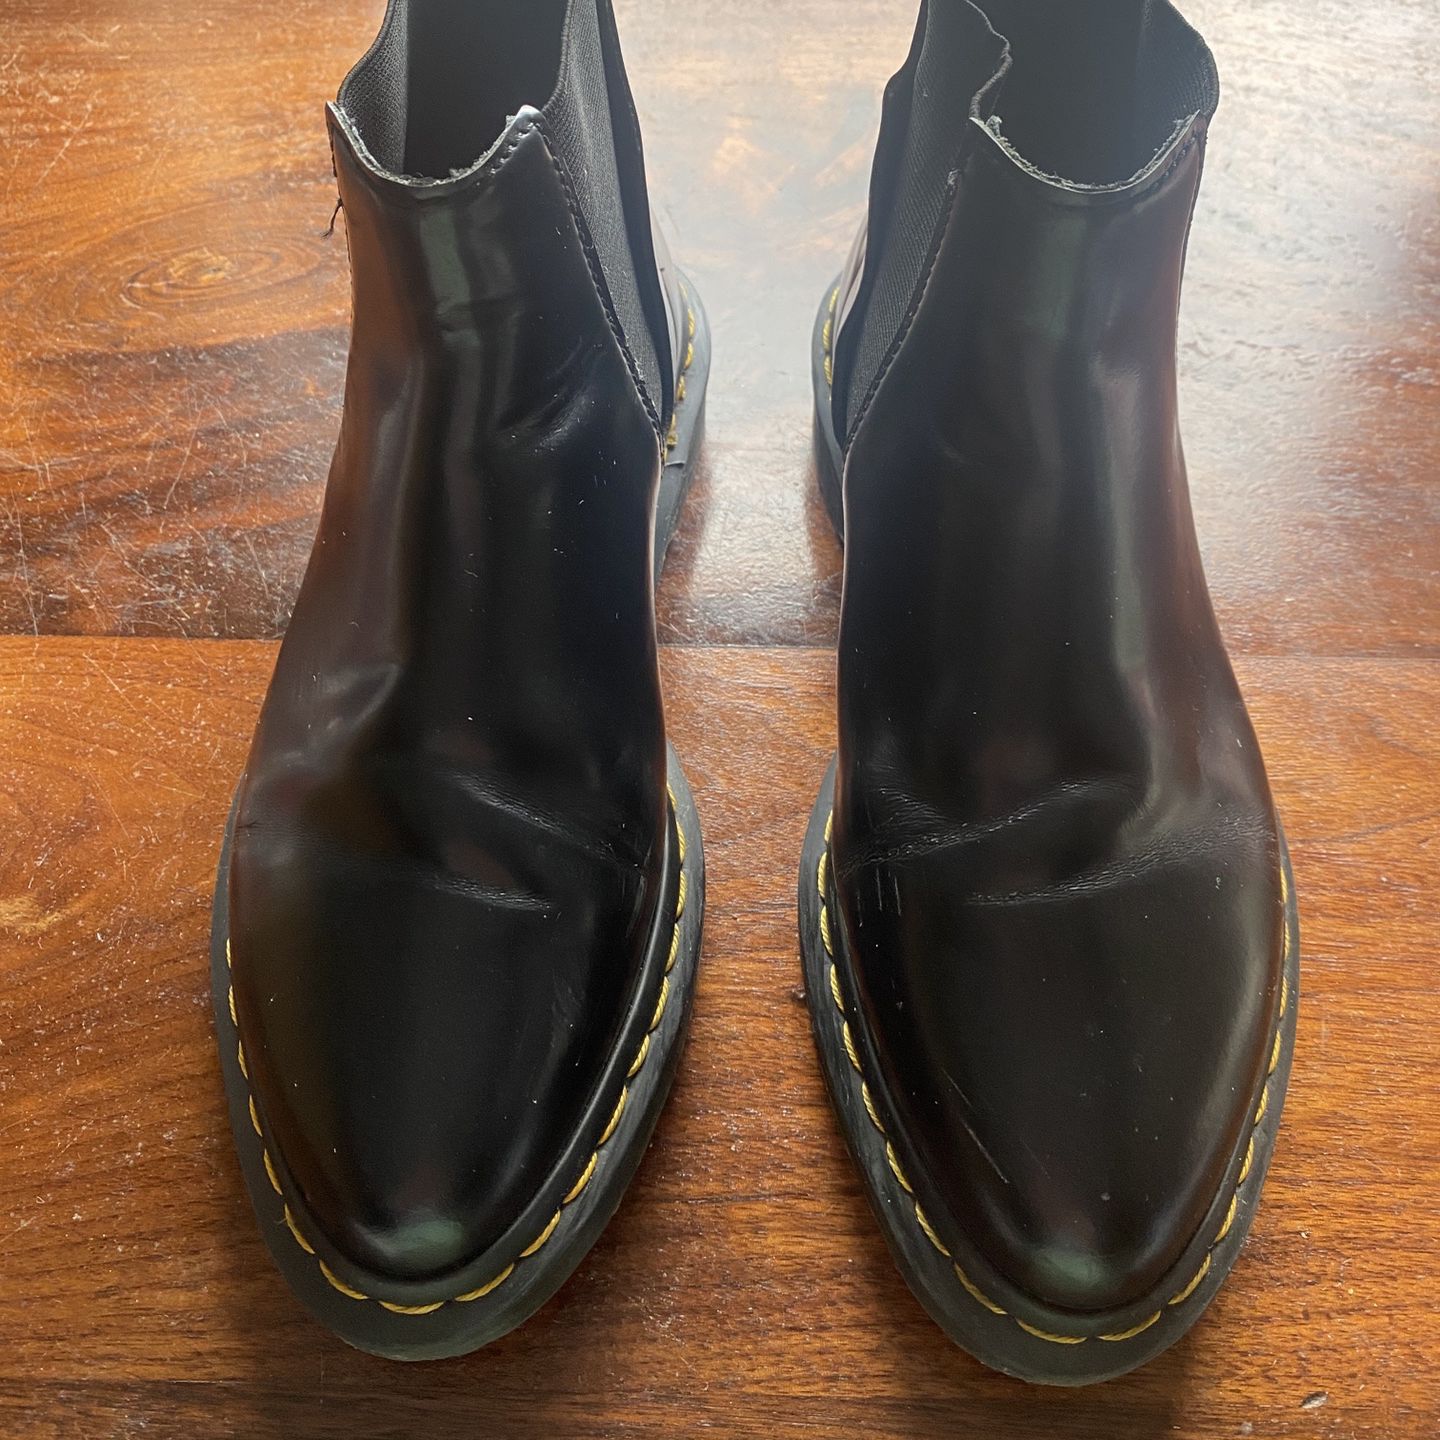 Dr. Martens Pointed Leather Chelsea Boots - Iconic Style with Original Box!